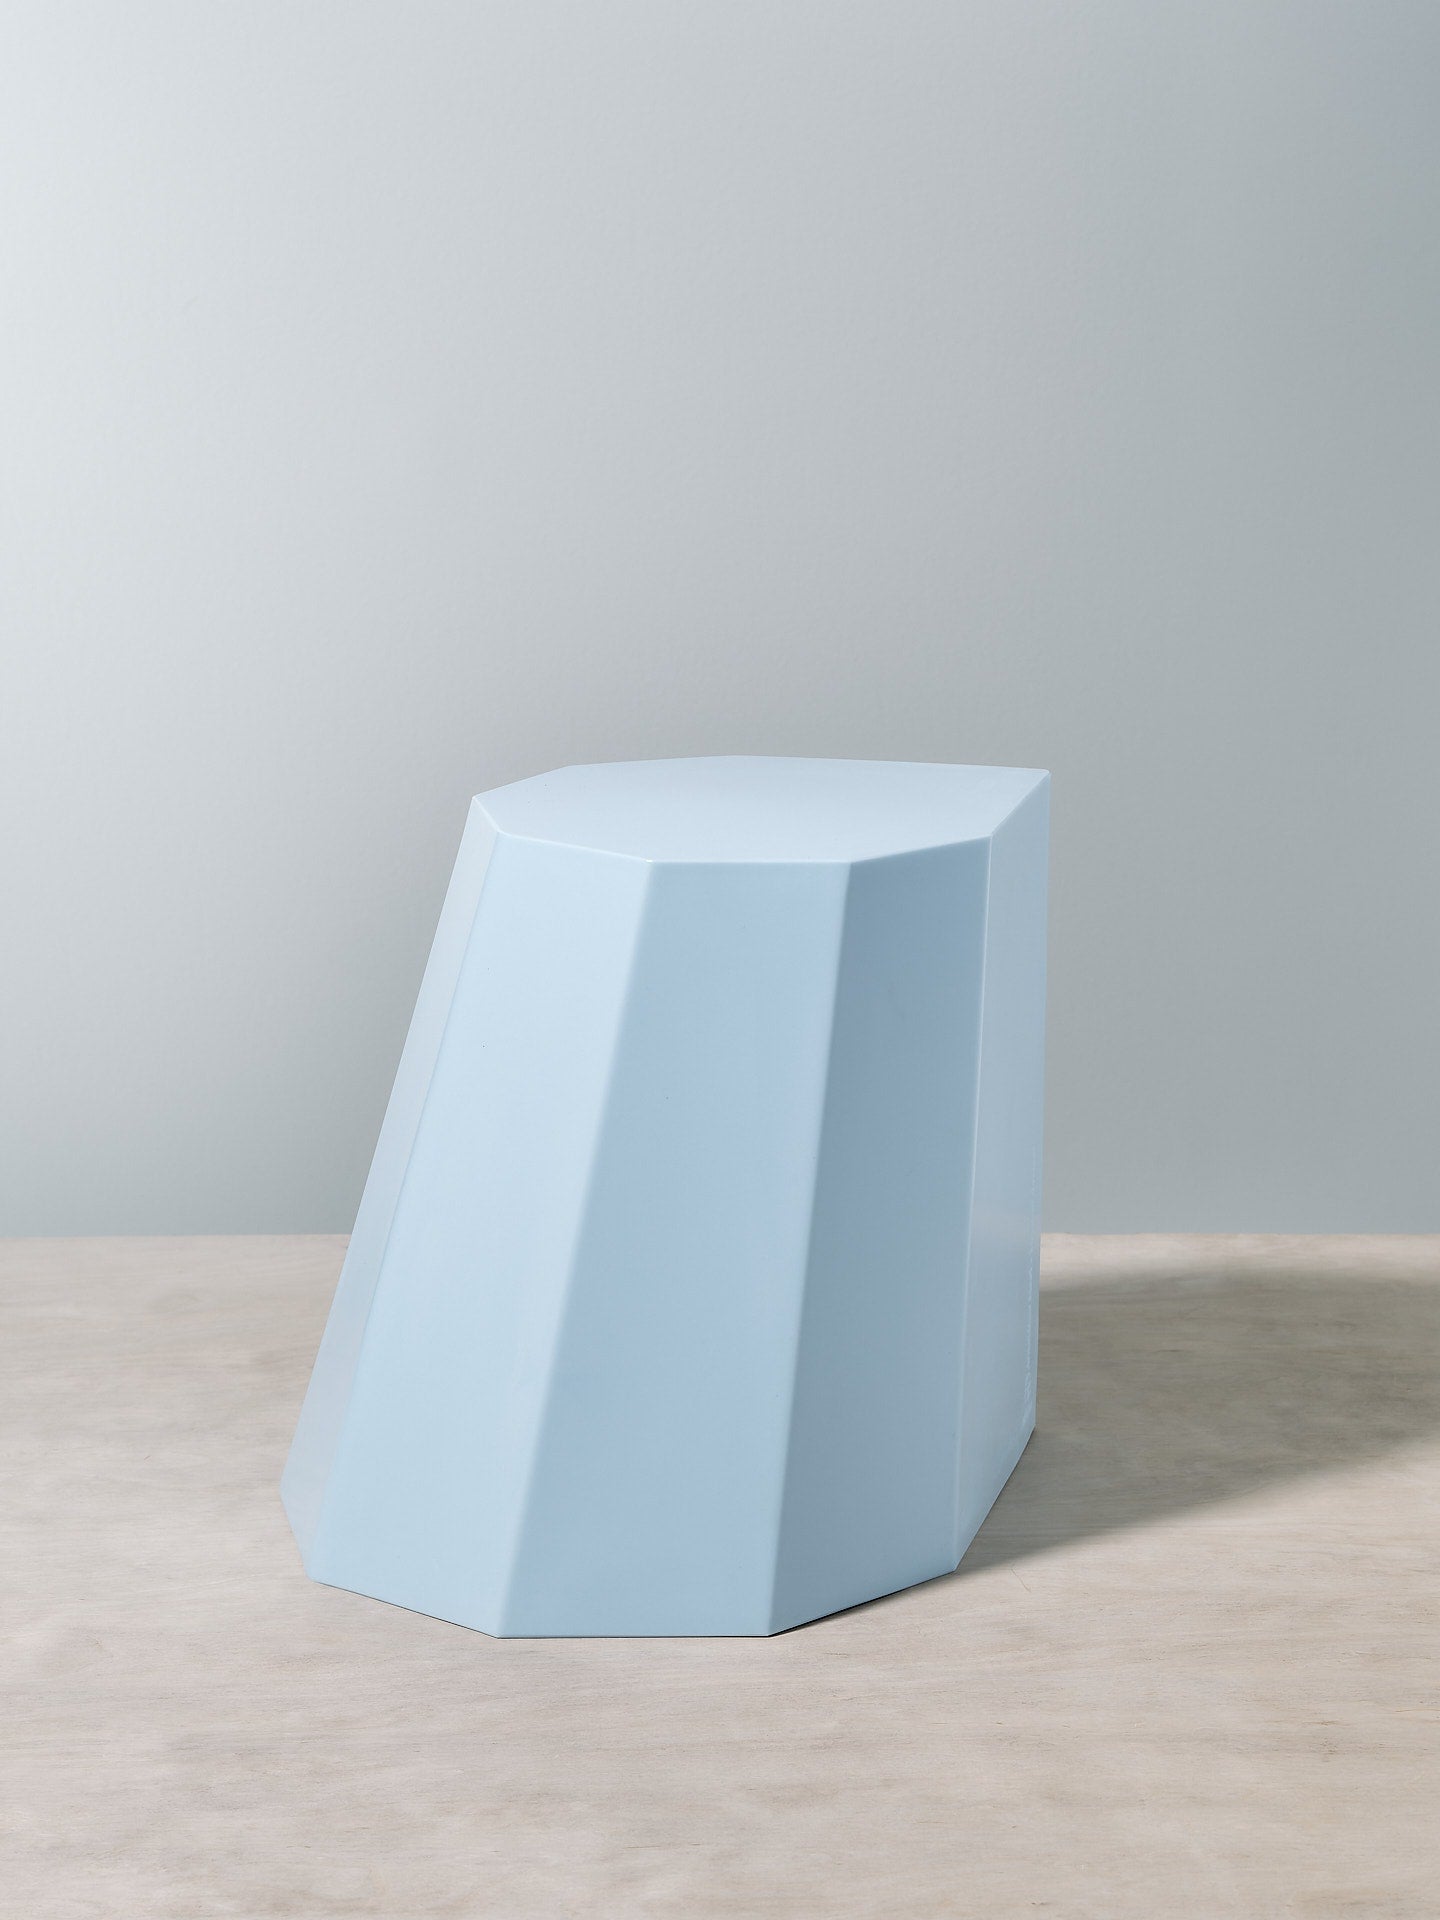 A Martino Gamper Arnoldino Stool - Baby Blue on top of a wooden table.